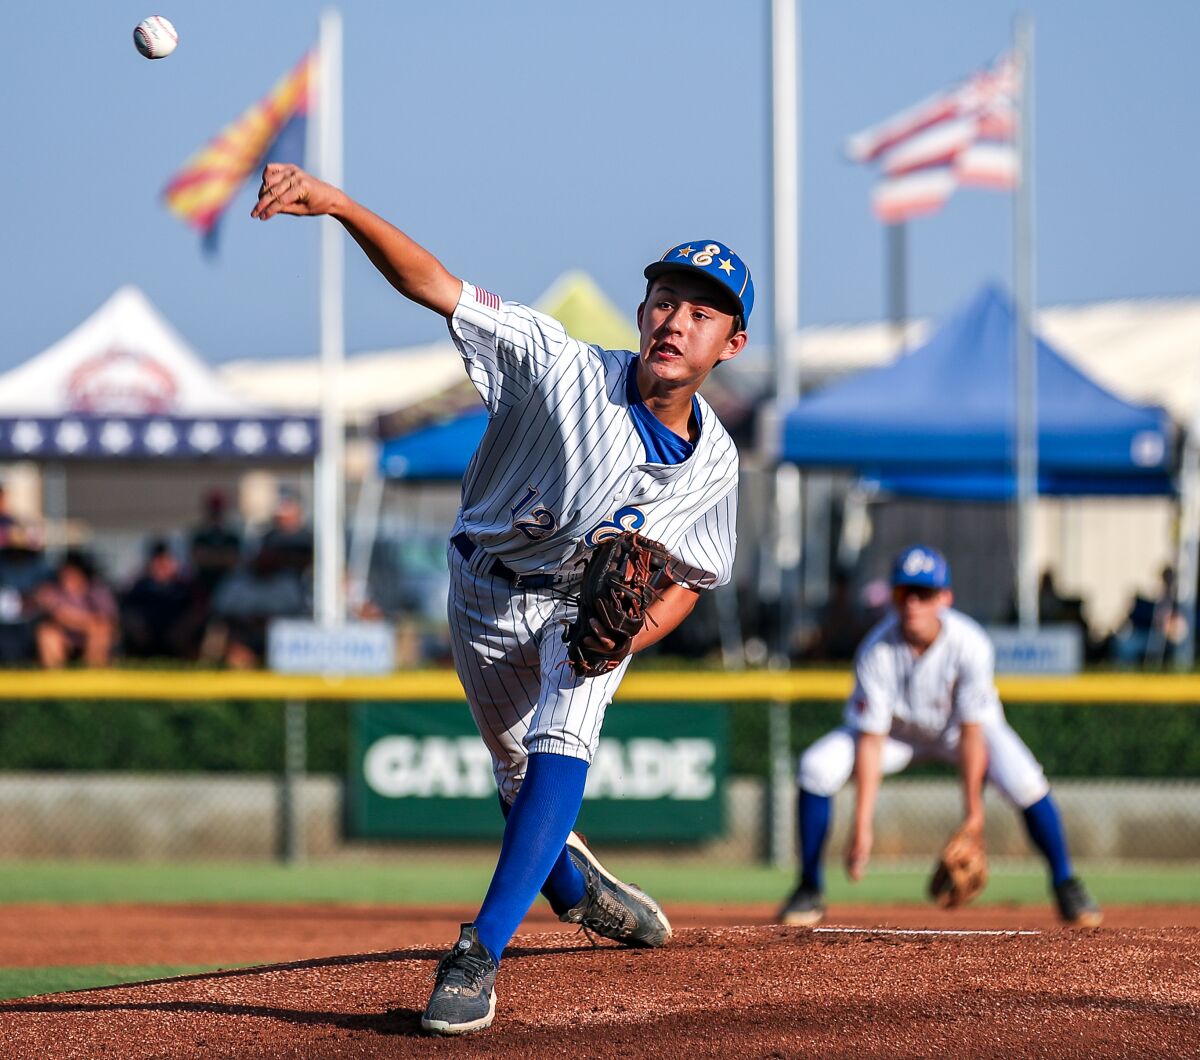 Louis Lappe of El Segundo pitched his team to victory on Friday night.